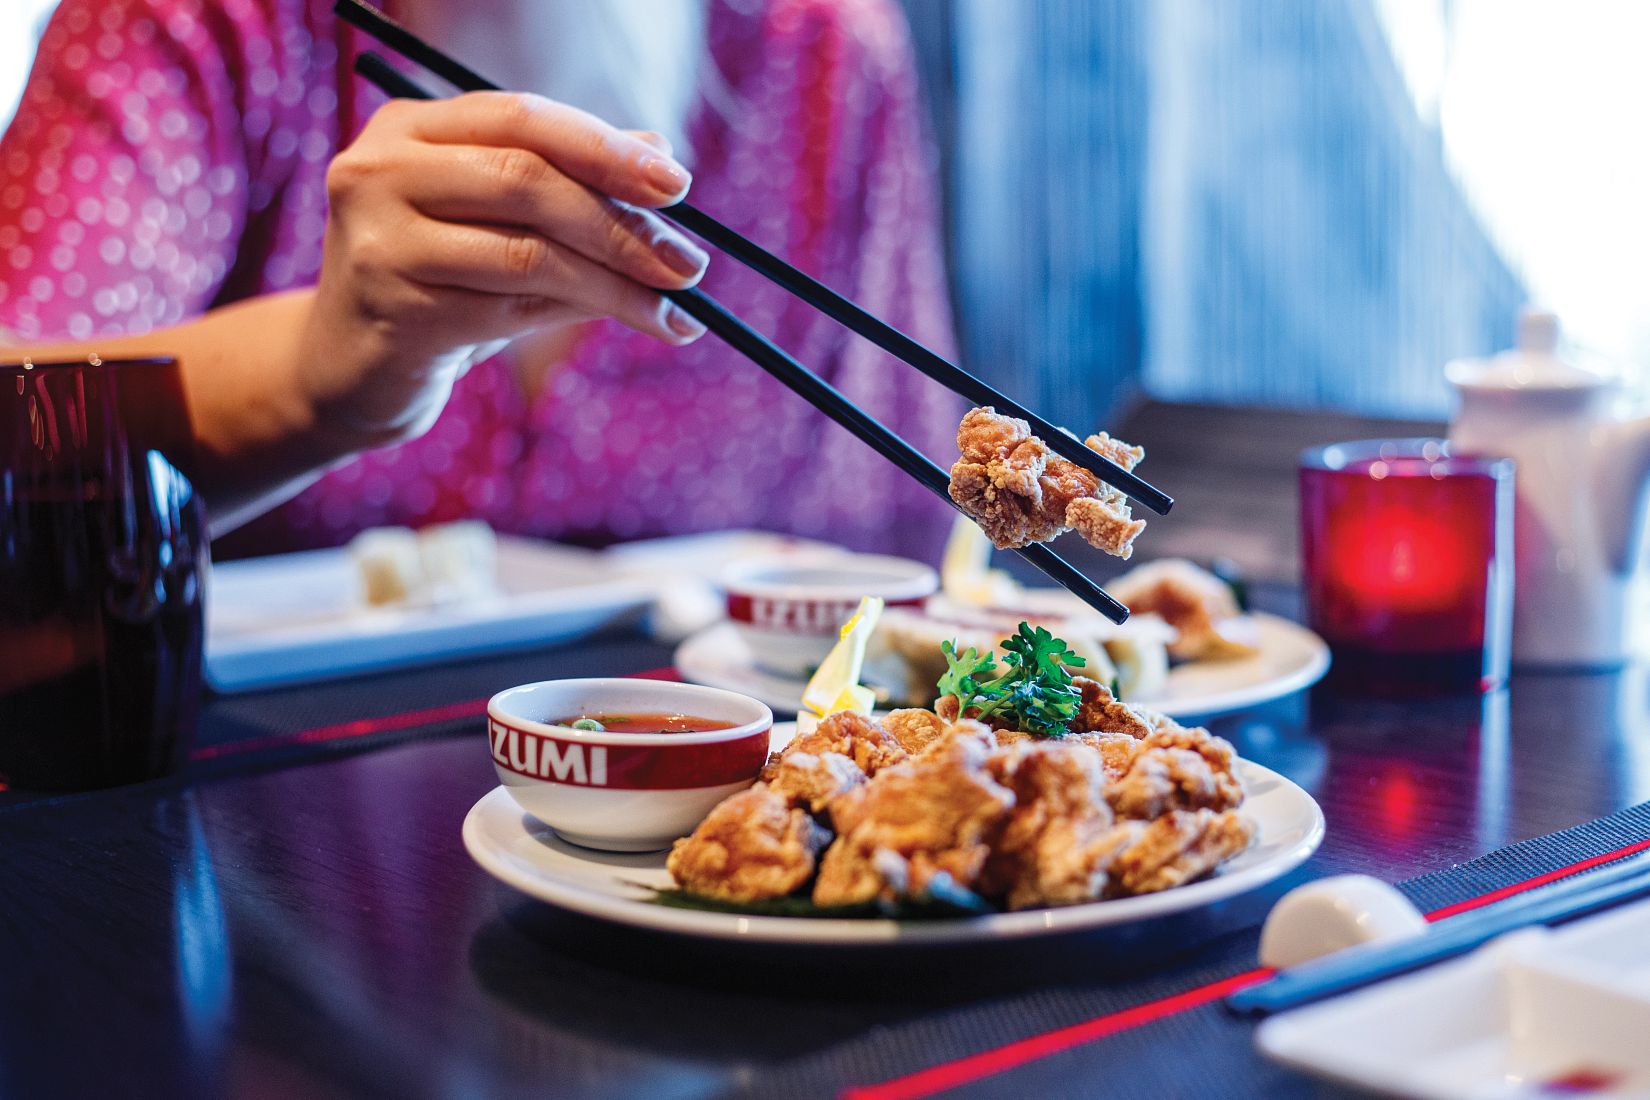 Izumi restaurant, hand holding chop sticks with piece of tempura, appetizer, SY, Symphony of the Seas, asian cooking, Japanese cuisine, dipping sauce